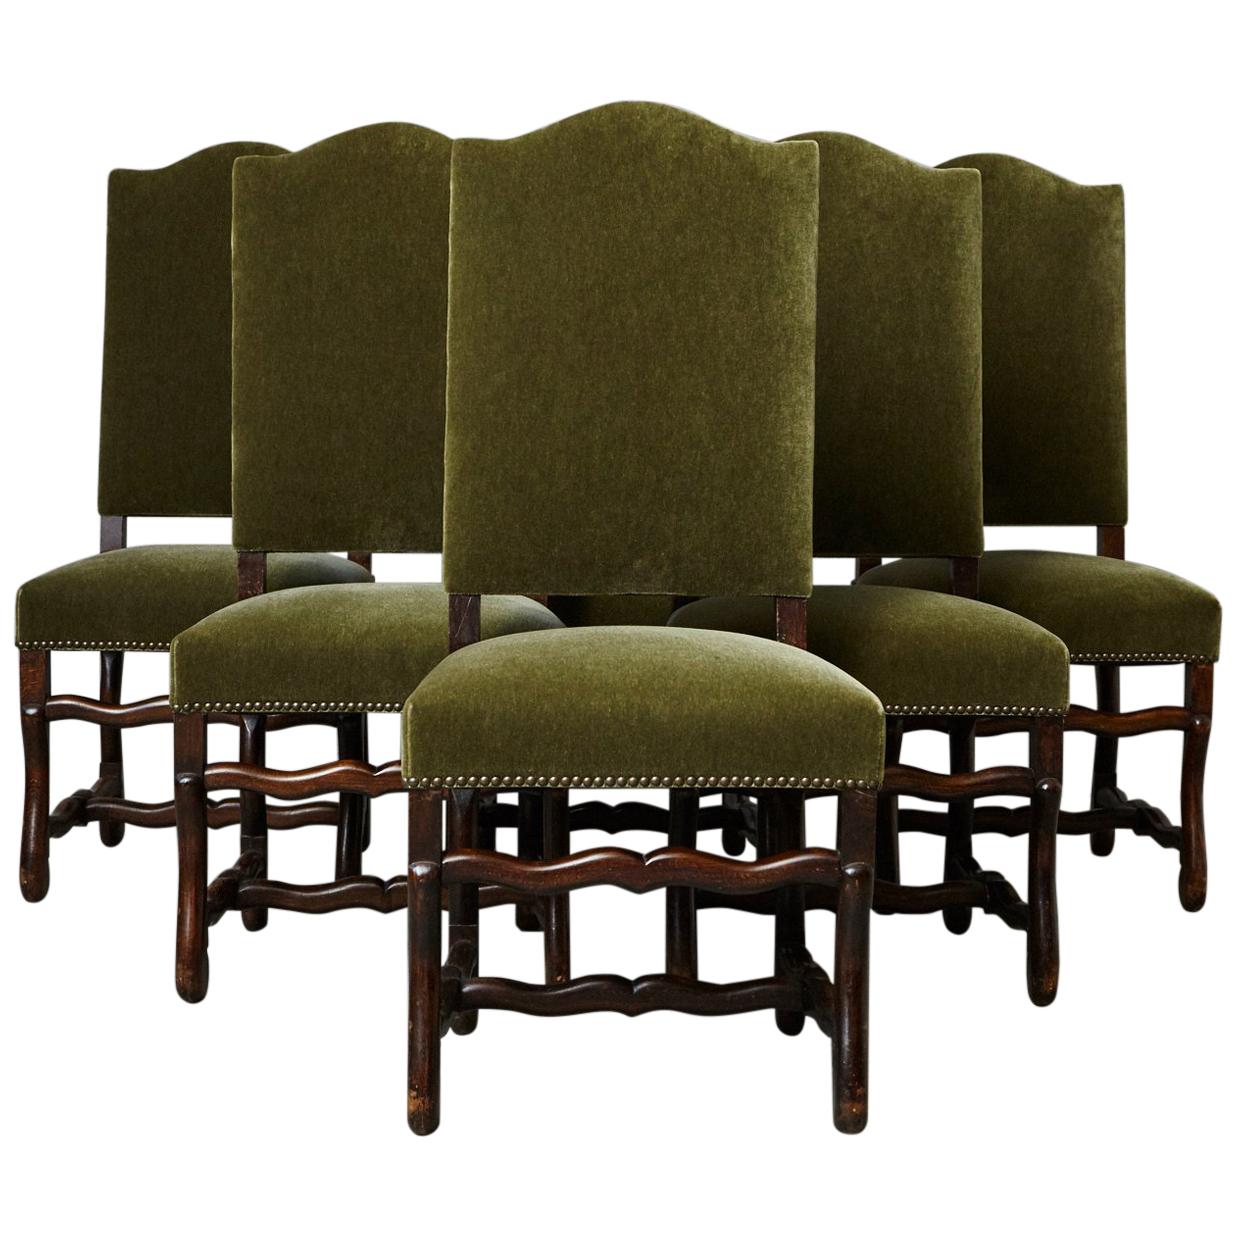 Set of Six French Louis XIV Style Os de Mouton Dining Chairs in Green Mohair